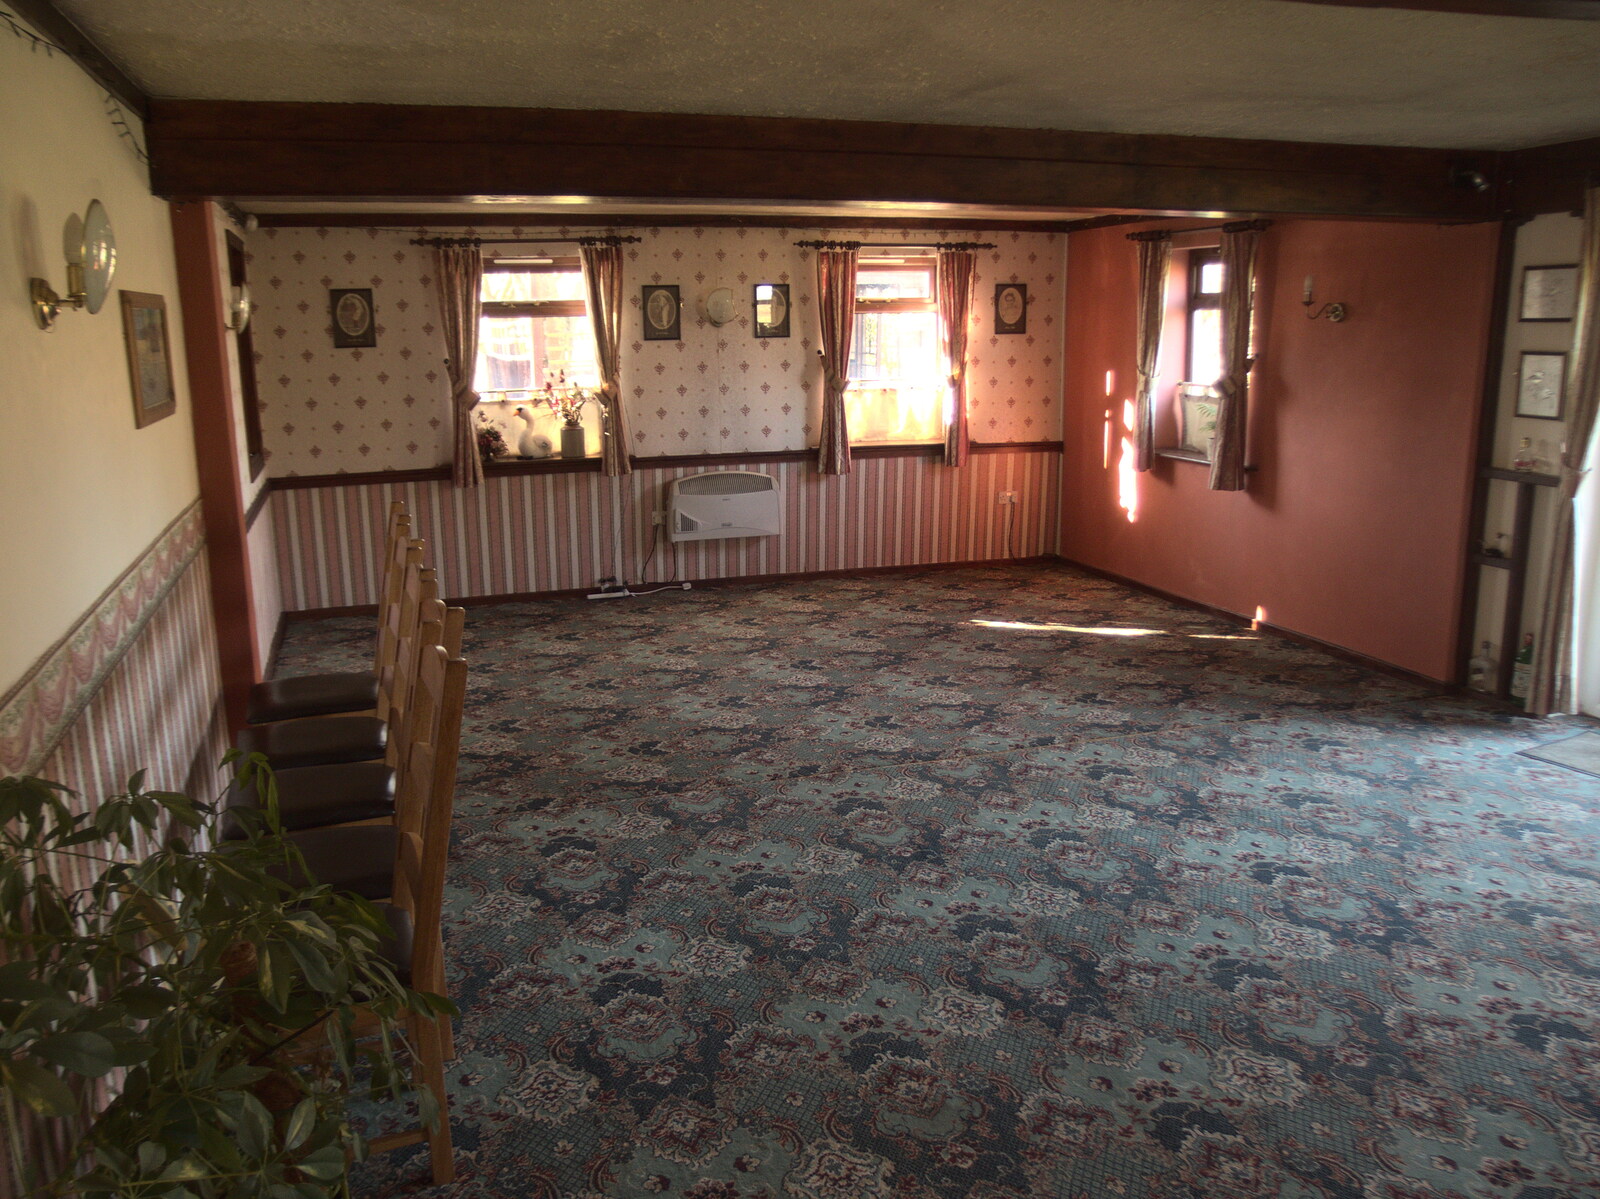 The Swan's restaurant is almost empty from The Swan Inn: An Epilogue, Brome, Suffolk - 17th February 2022